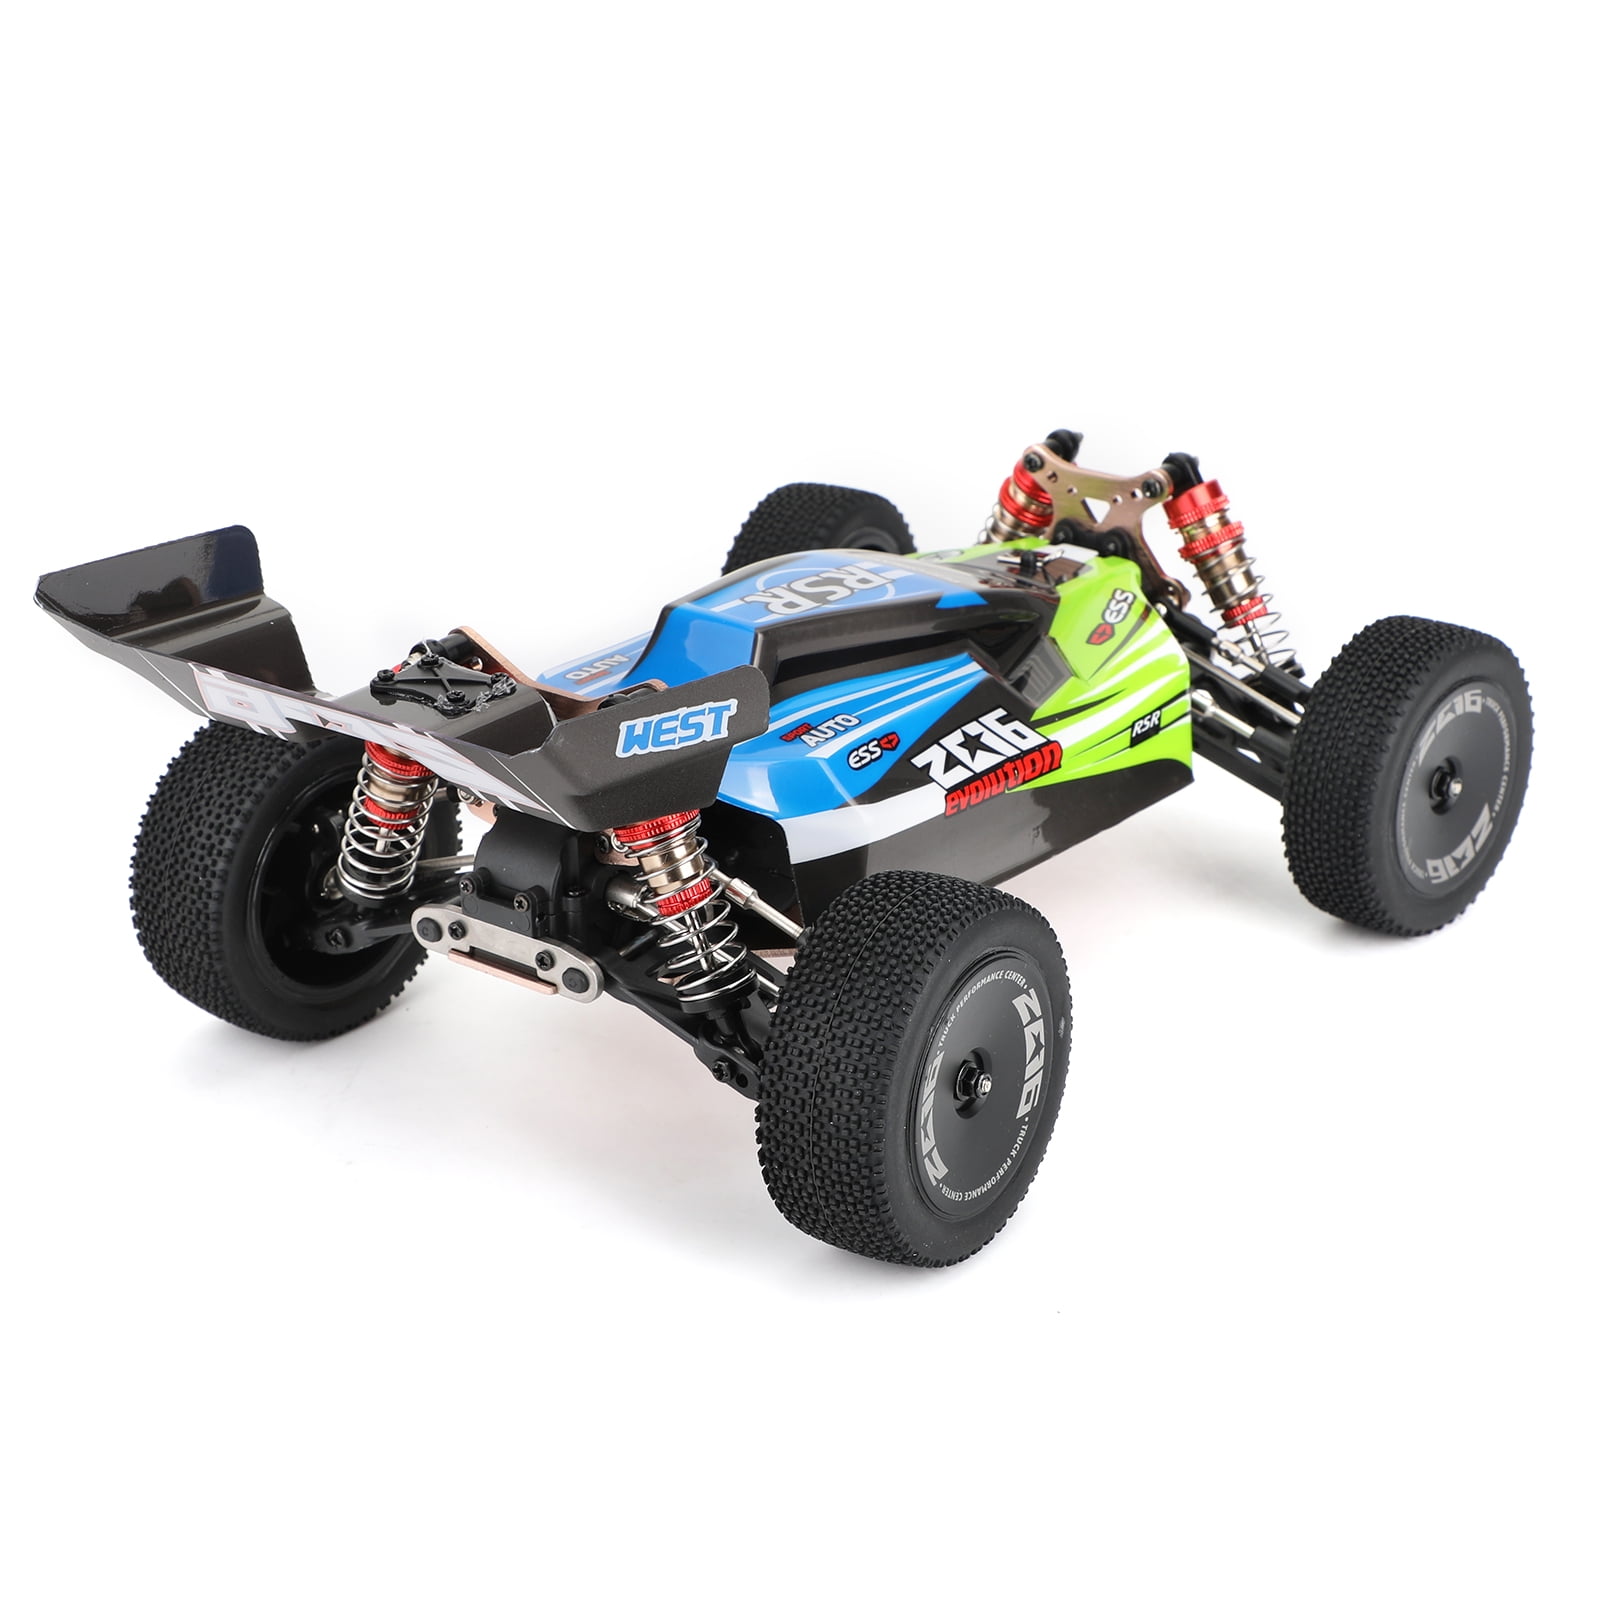 TesPower Wltoys 144001 RC Car Buggy with 2 Charger Extra 3600mAh  Battery,1:14 Full Scale 4WD 60km/h High Speed Racing Off-Road Drift for  Adults